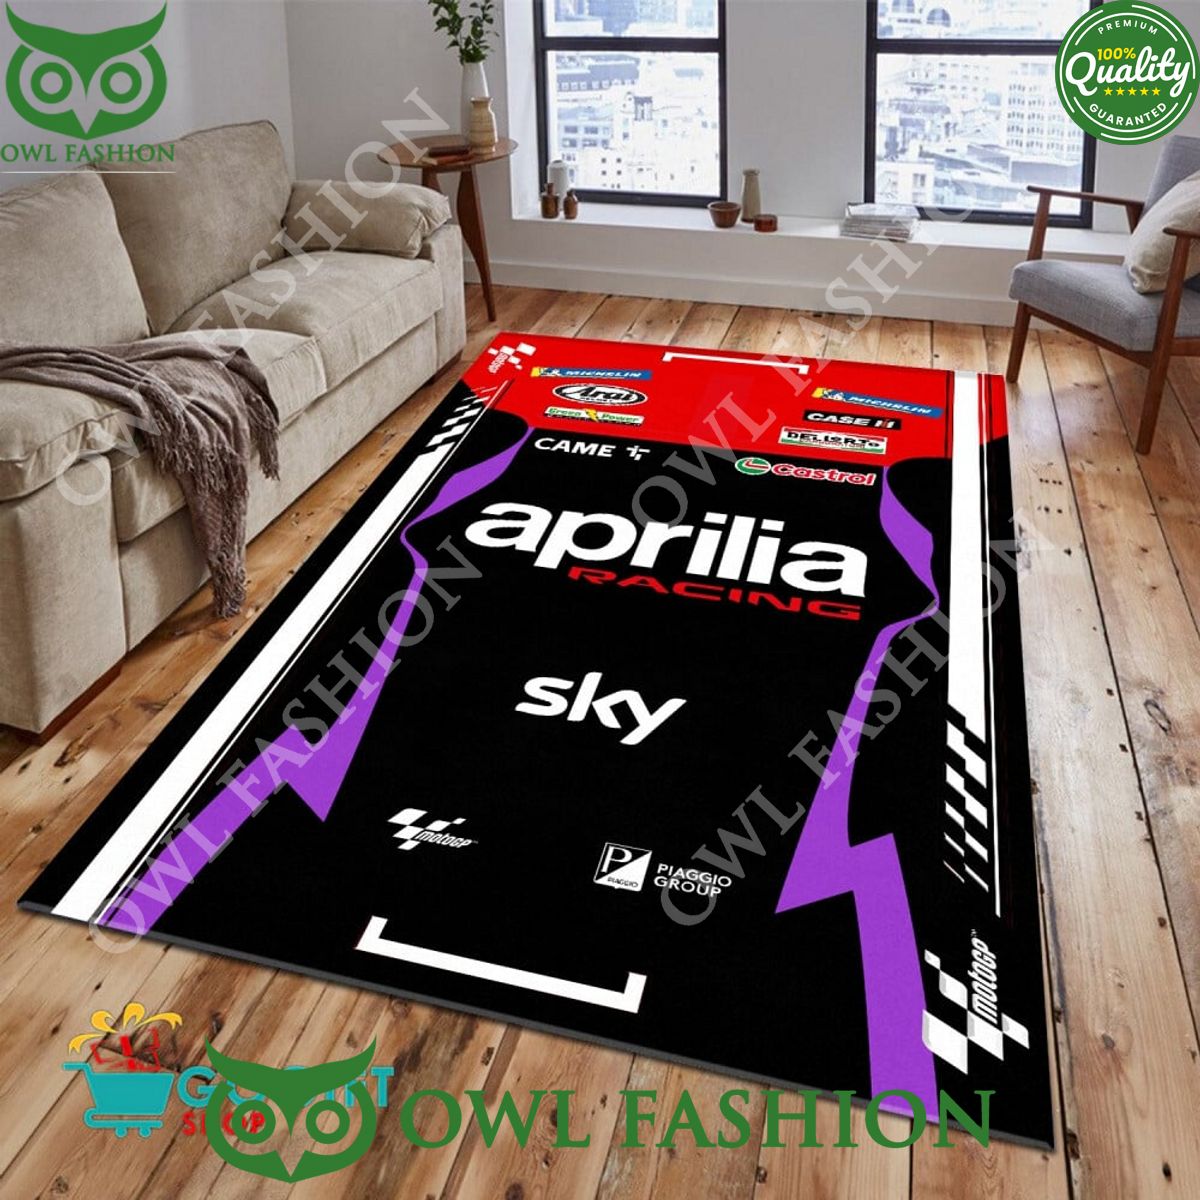 Aprilia Racing Sky Team Limited Carpet Rug Such a charming picture.